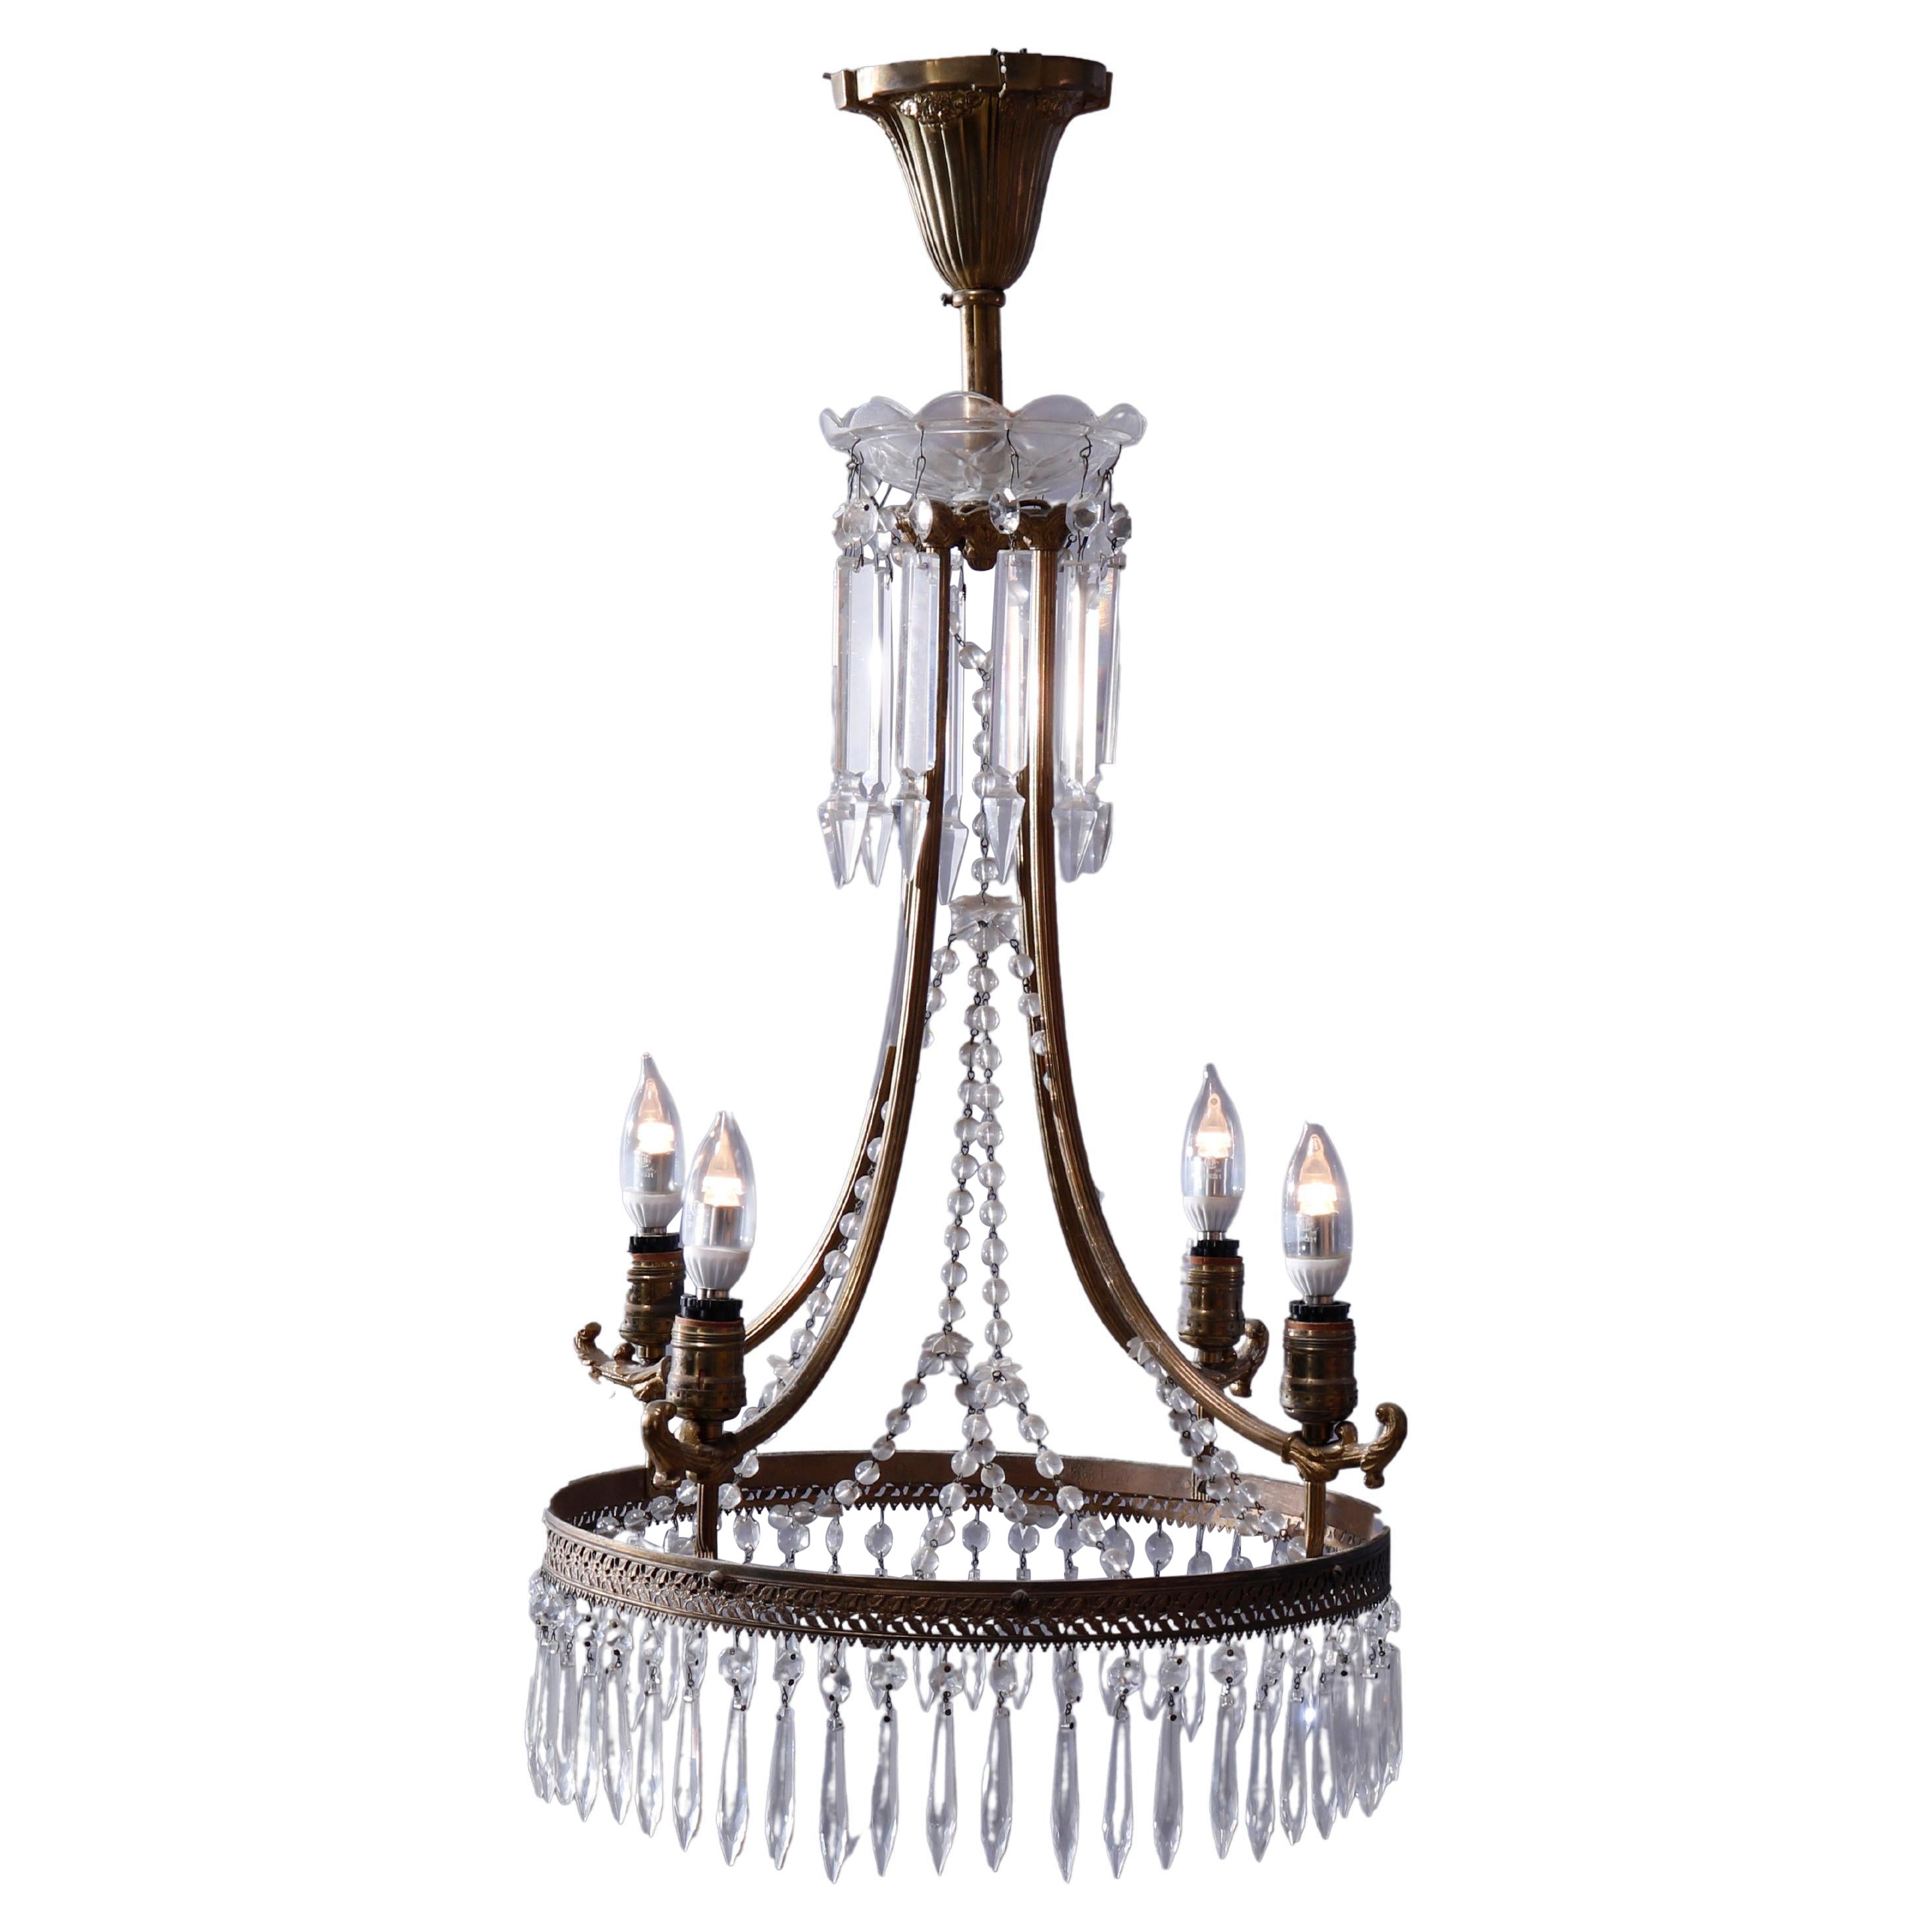 Antique French Style Bronzed Four-Light Chandelier with Draped Crystals, c1920 For Sale